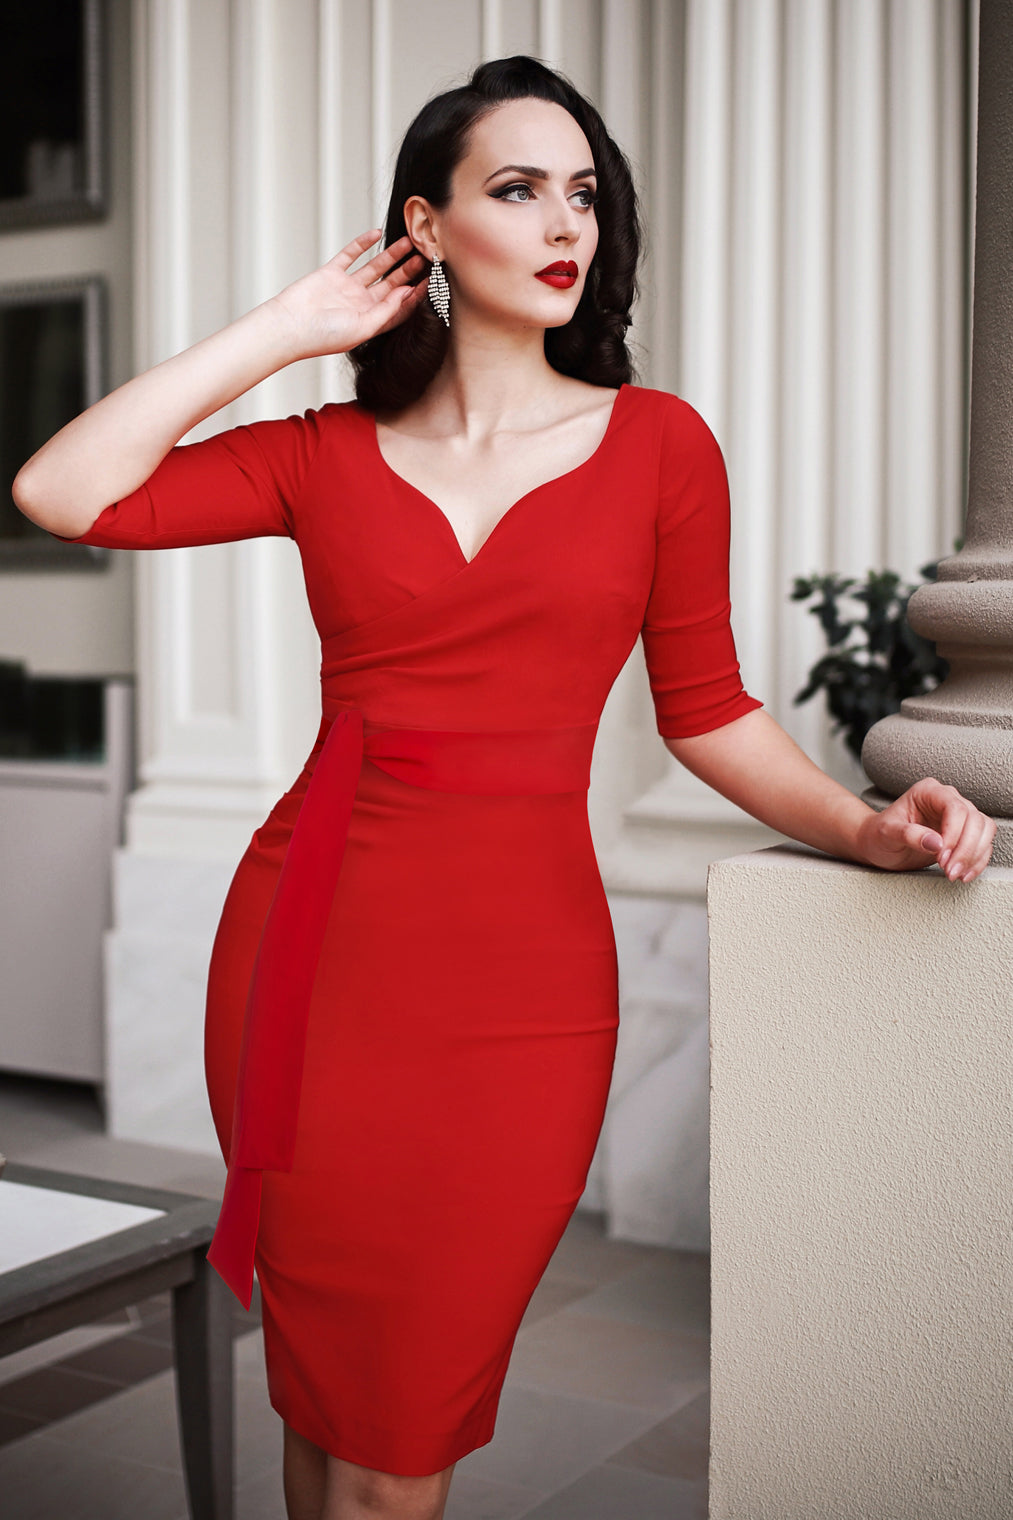 The Bombshell Sleeved Pencil Dress in Lipstick Red